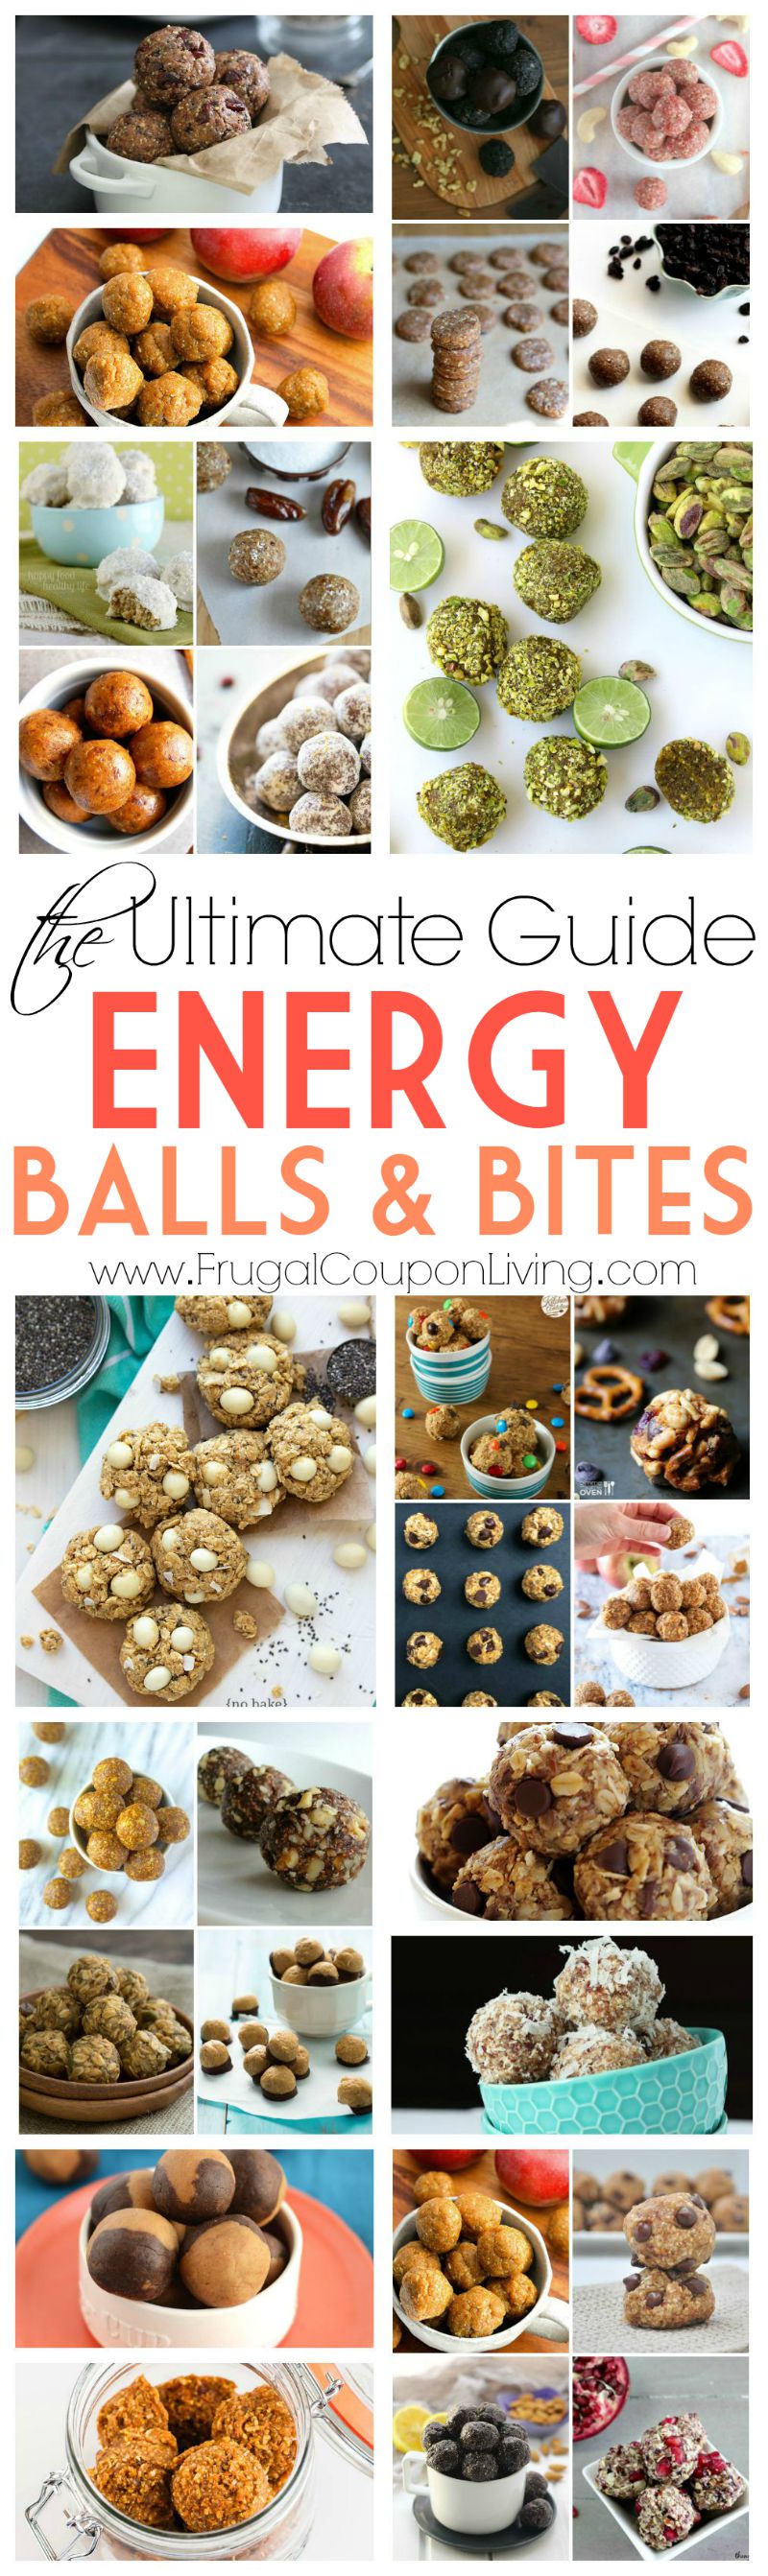 energy-bites-Collage-frugal-coupon-living